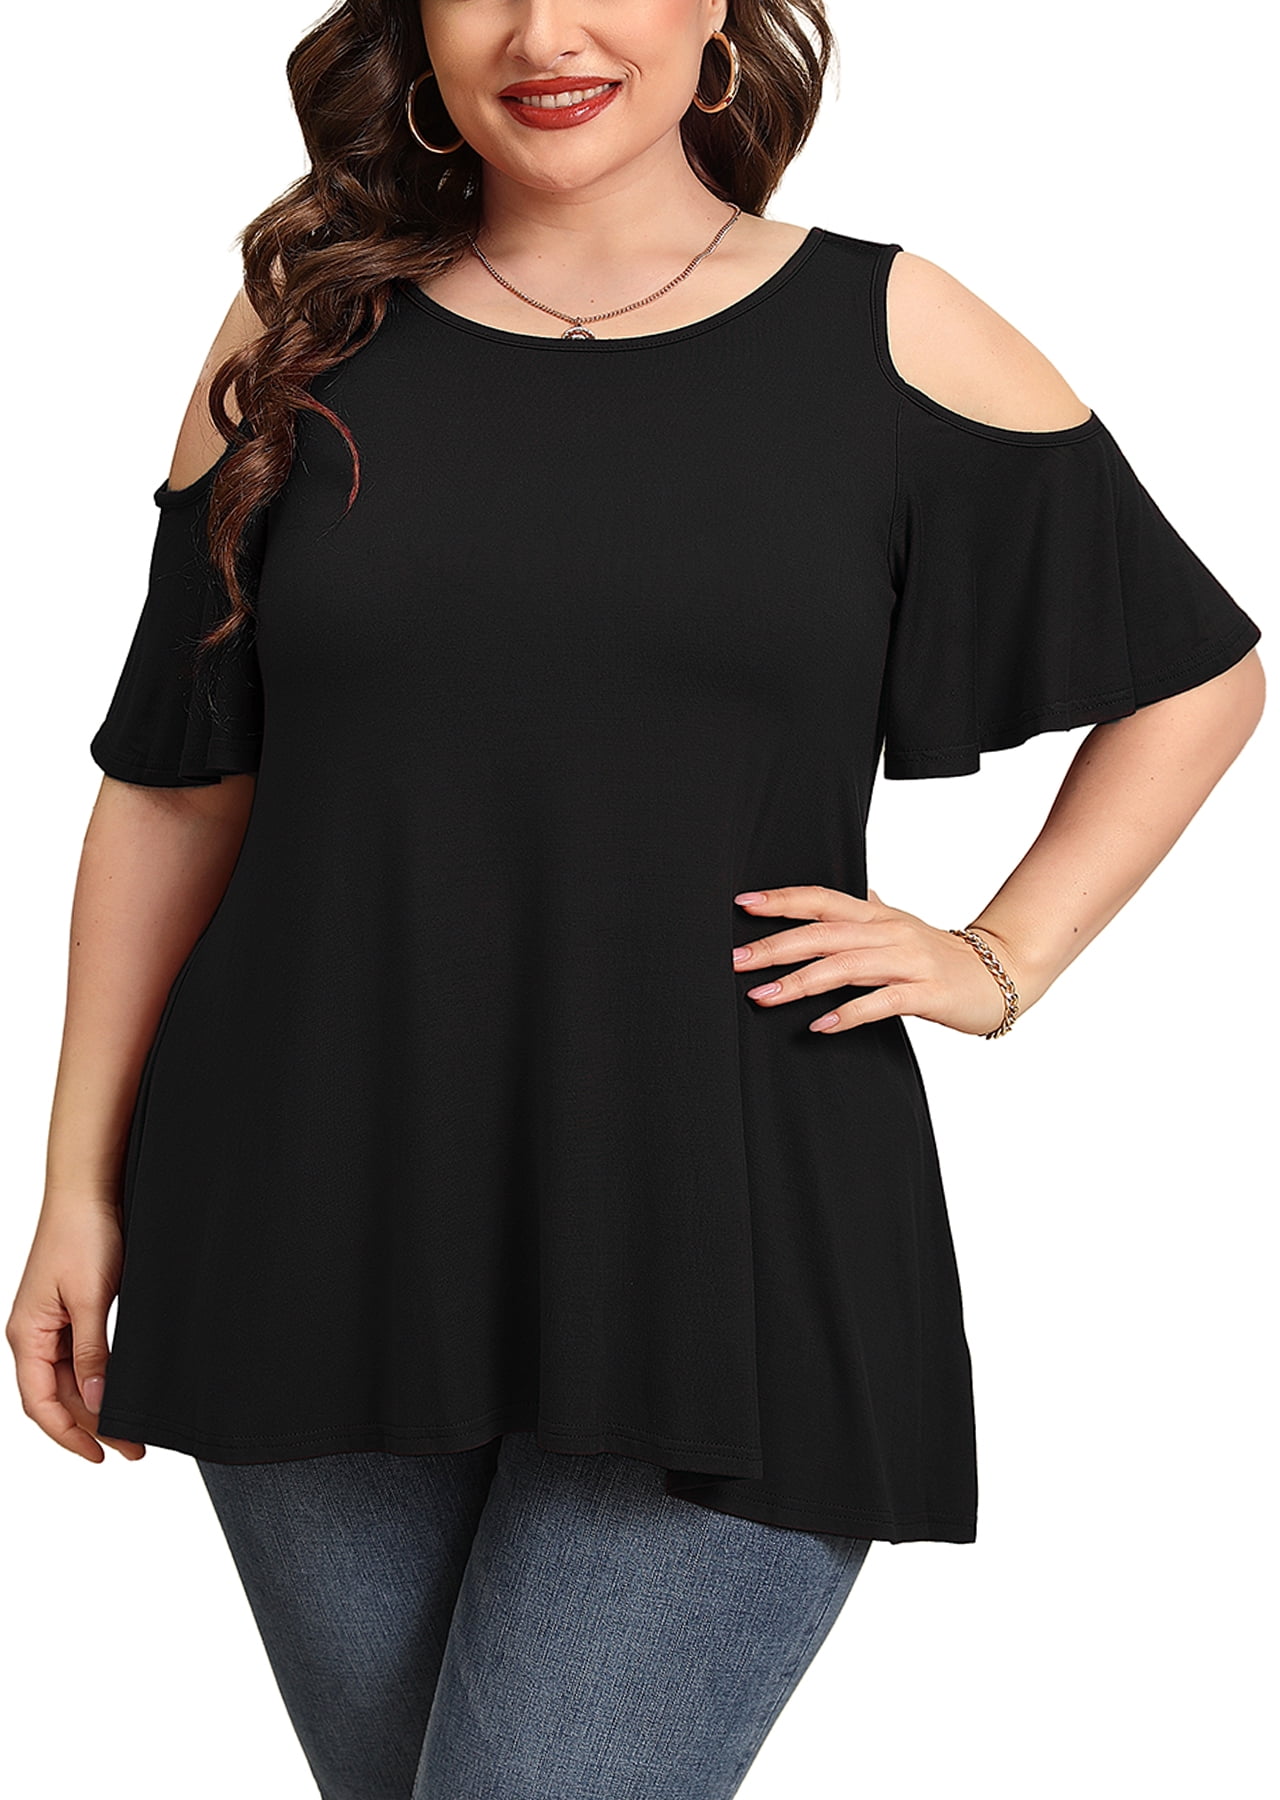 Xpenyo Women Short/Long Sleeve Tops Solid Color Summer T-Shirt Long Tunic Casual Blouse Round Neck Hanky Hem Loose Tops for Ladies